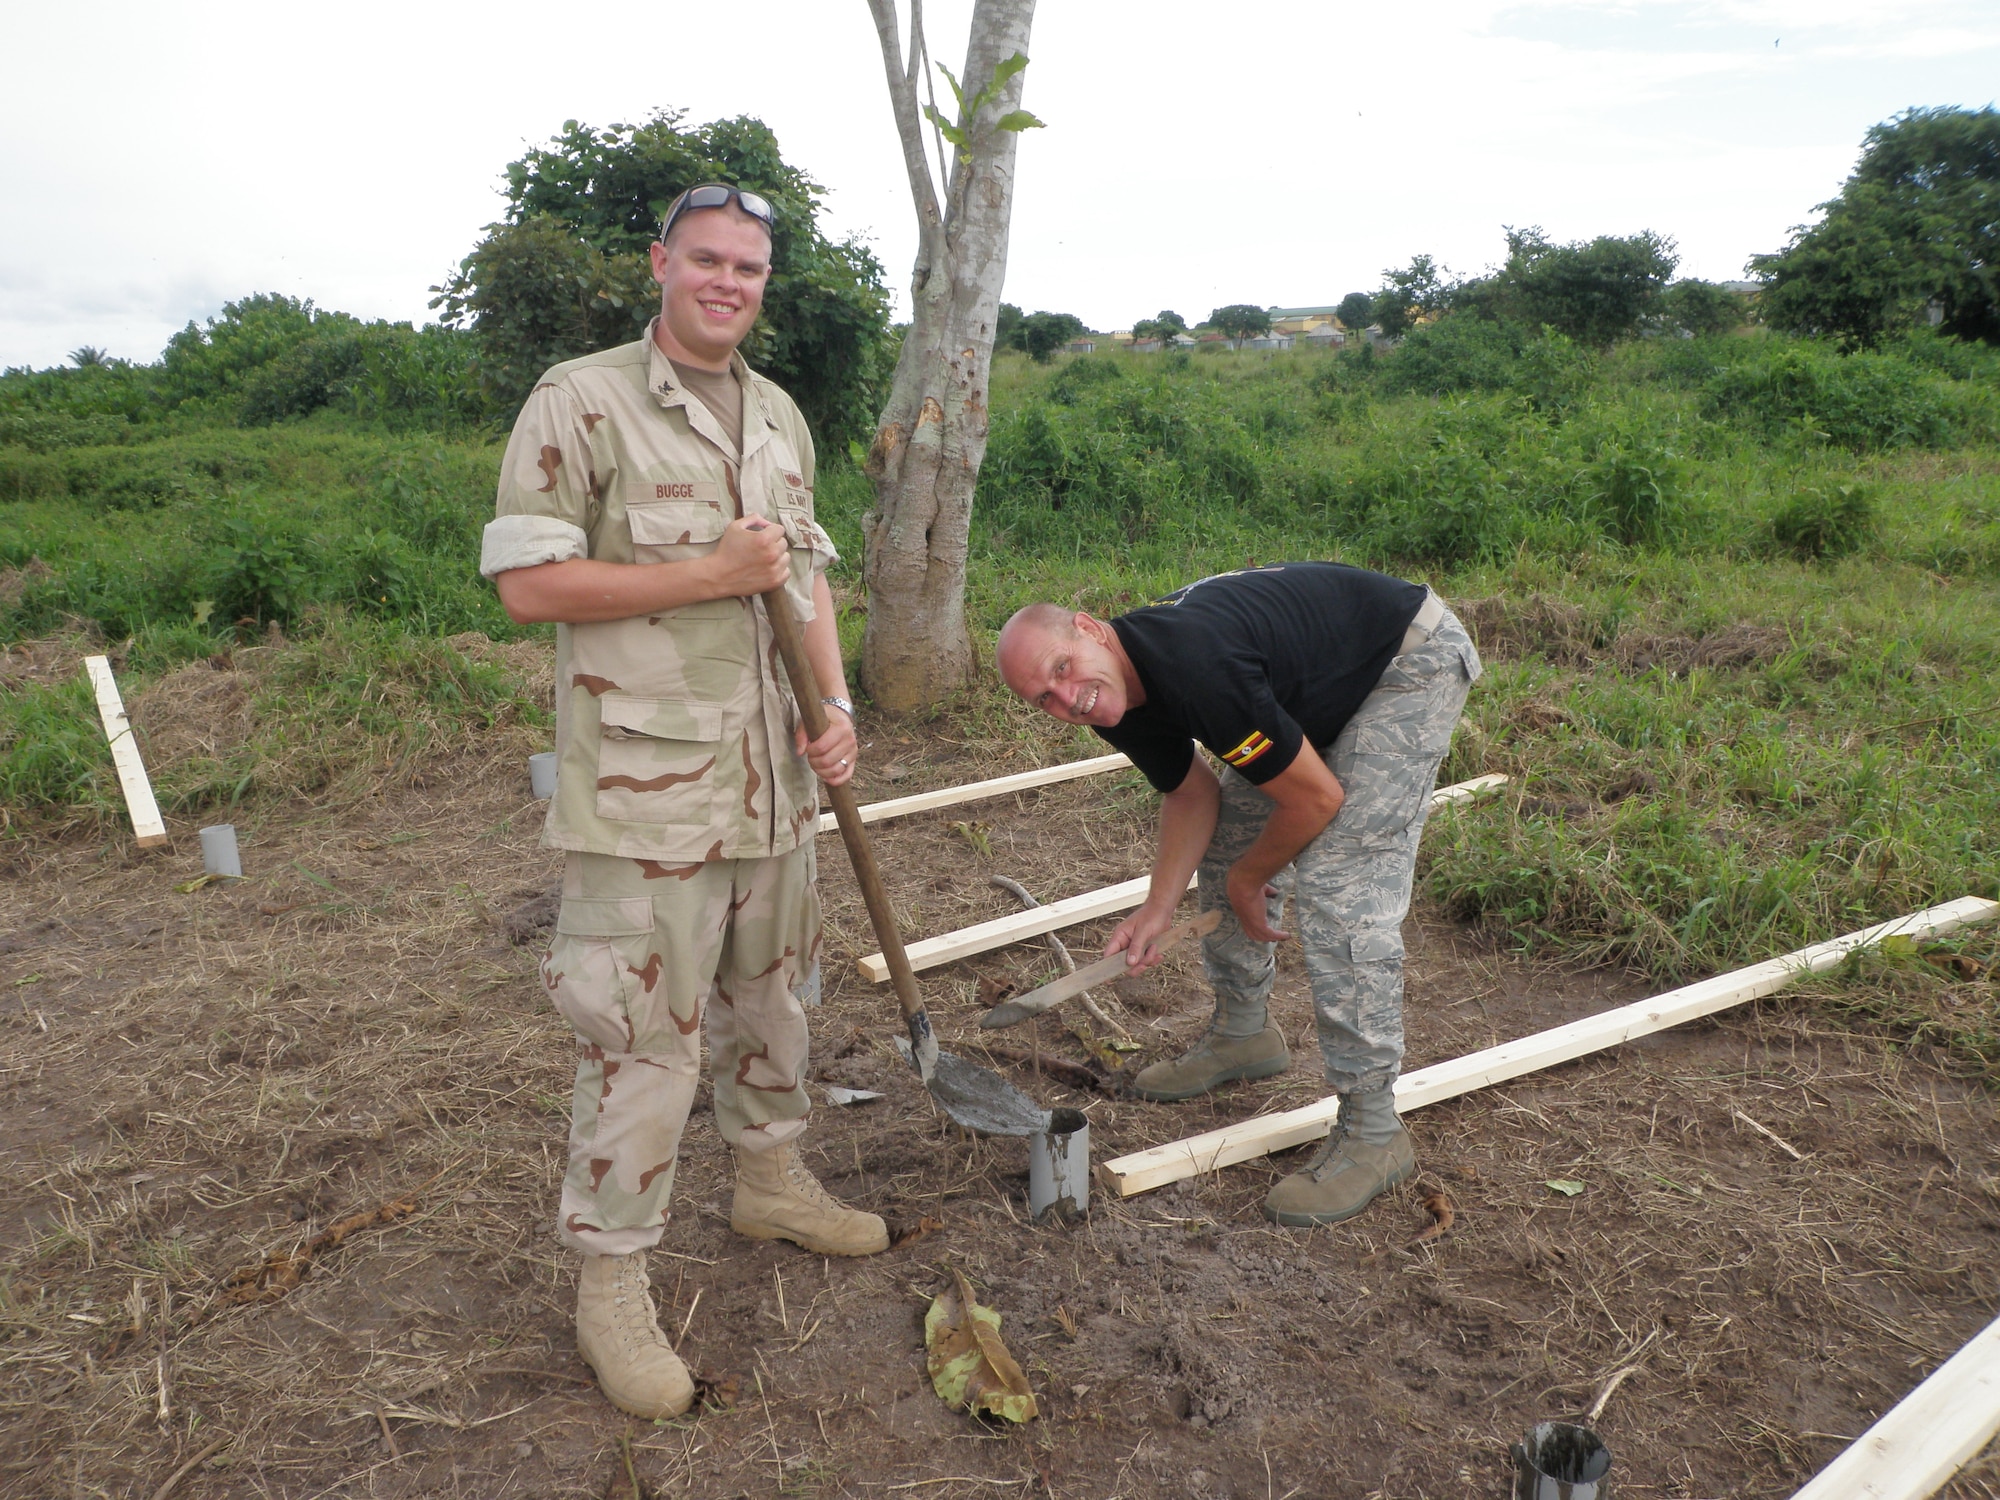 Petty Officer Brian Bugge and MSgt David Zibell prepare posts for a mock village in Uganda used for close quarter’s combat training.